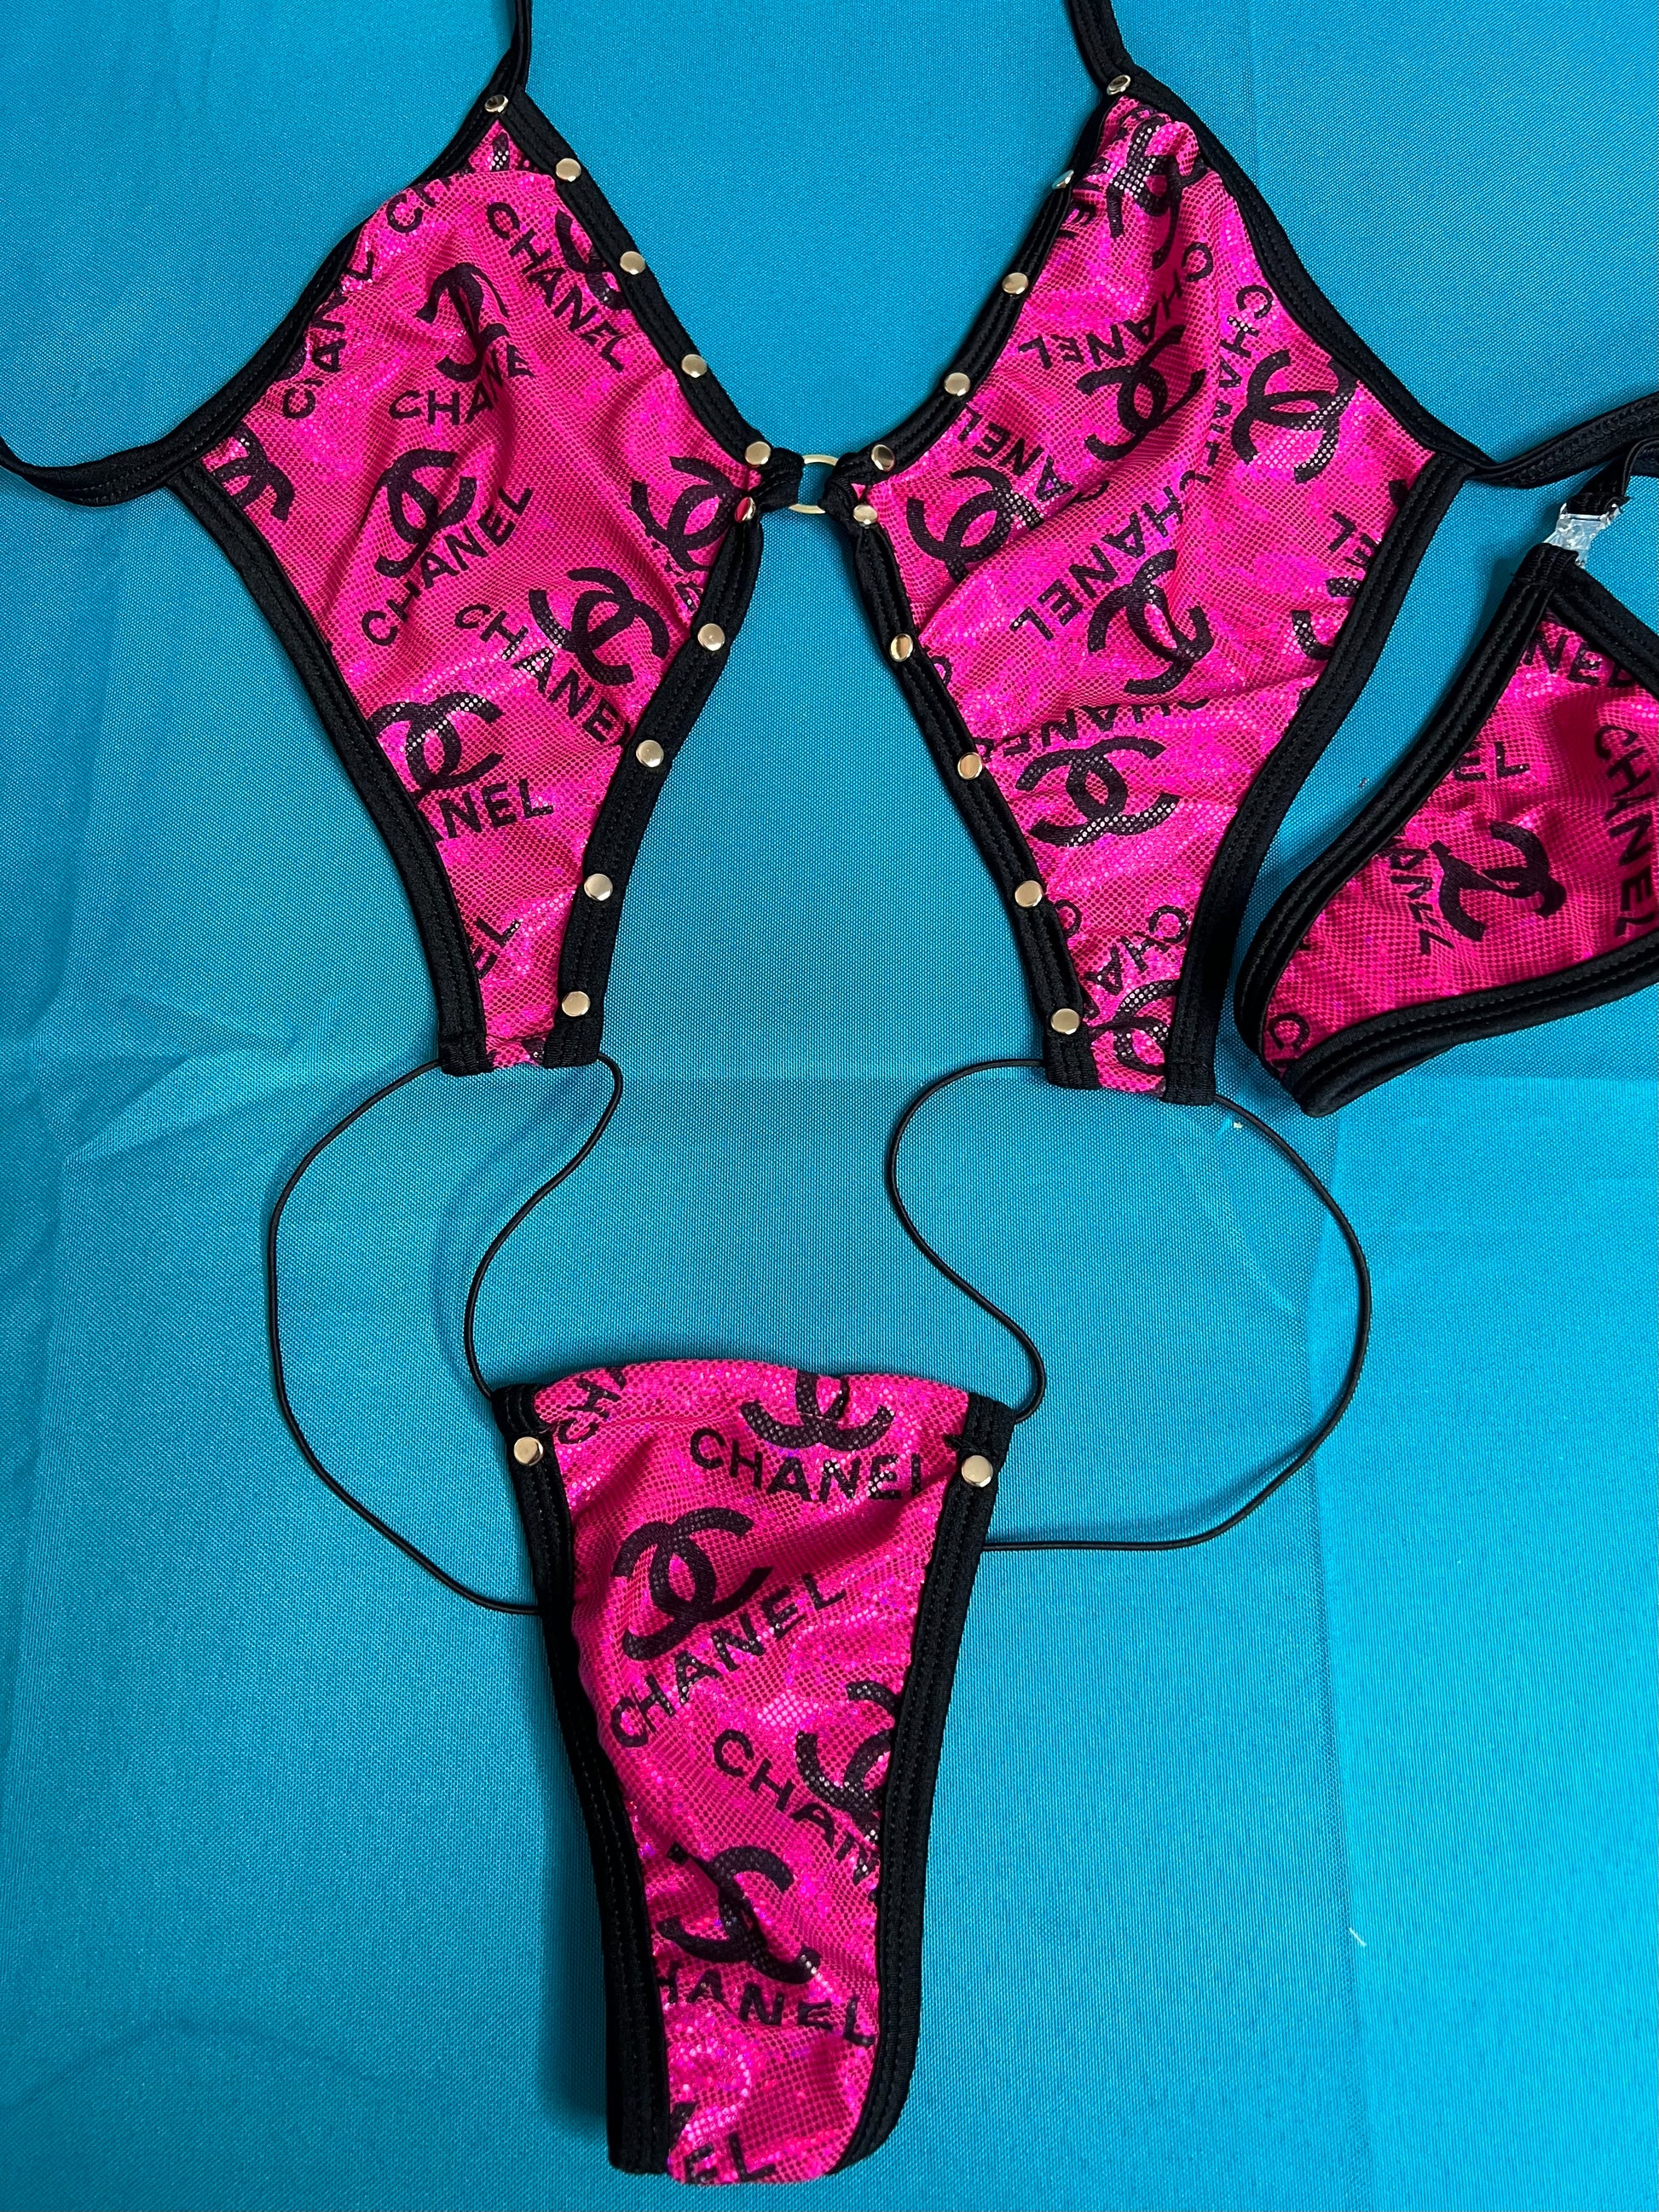 Hot Pink Sling Shot One-Piece Outfit Exotic Dance Wear Premium